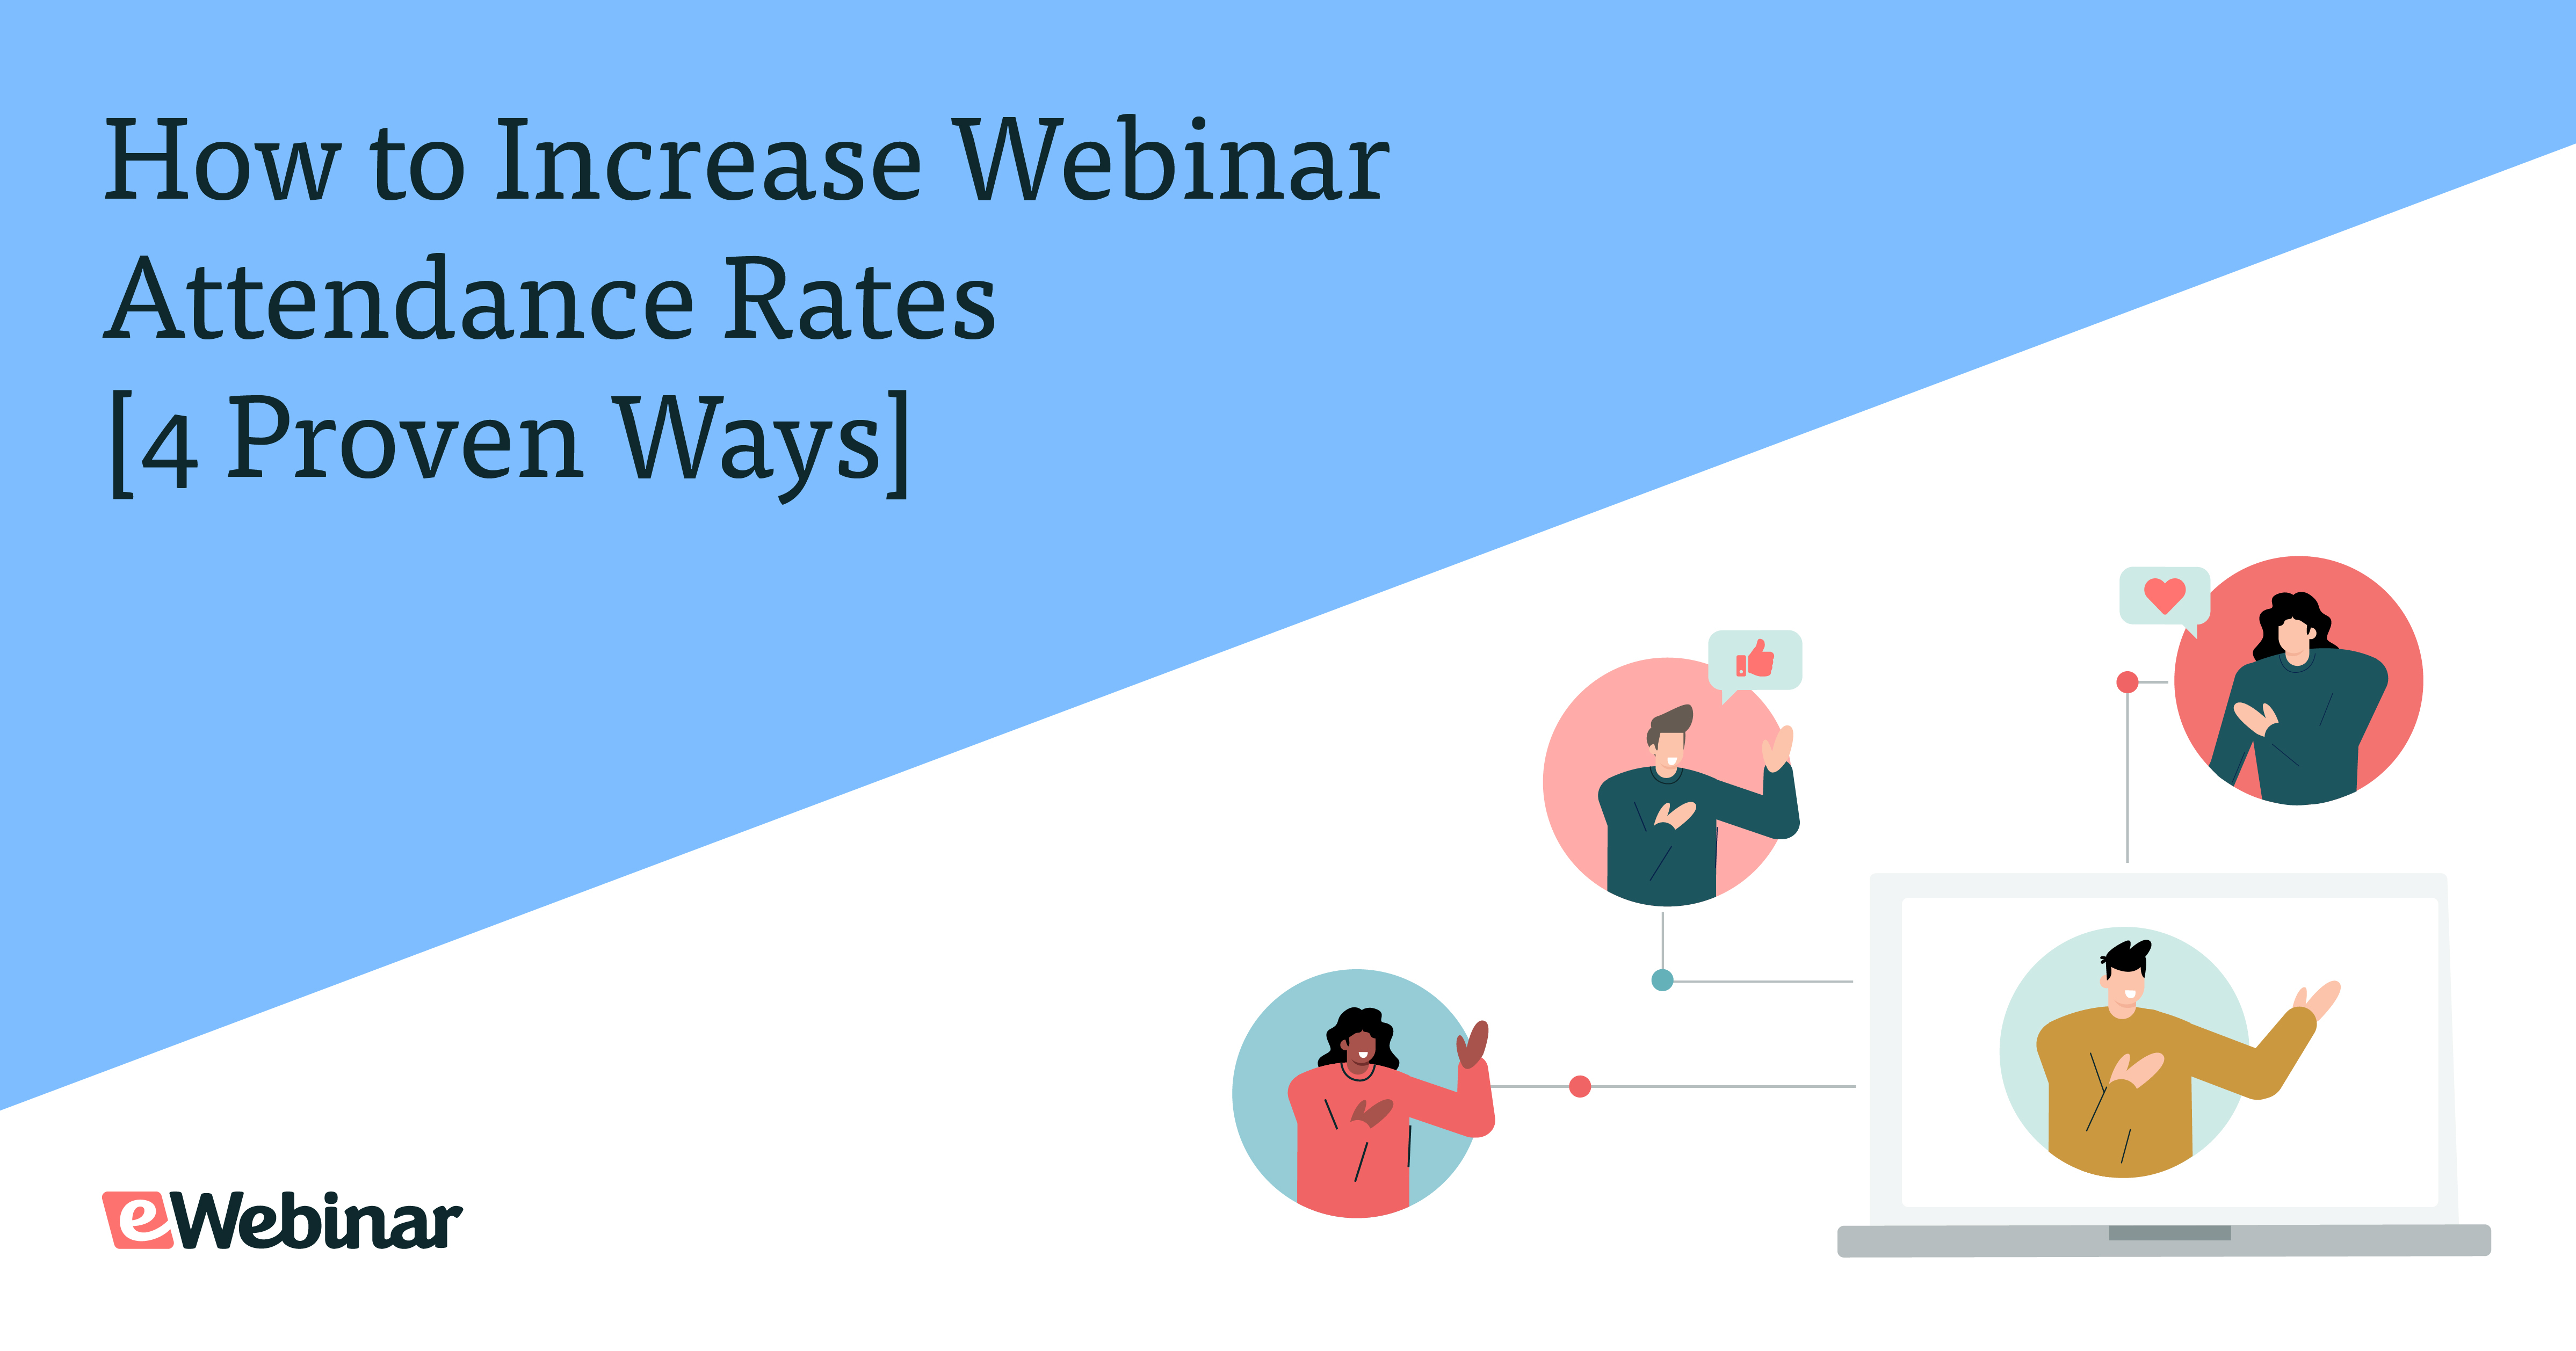 How to Increase Webinar Attendance Rates [4 Proven Ways]